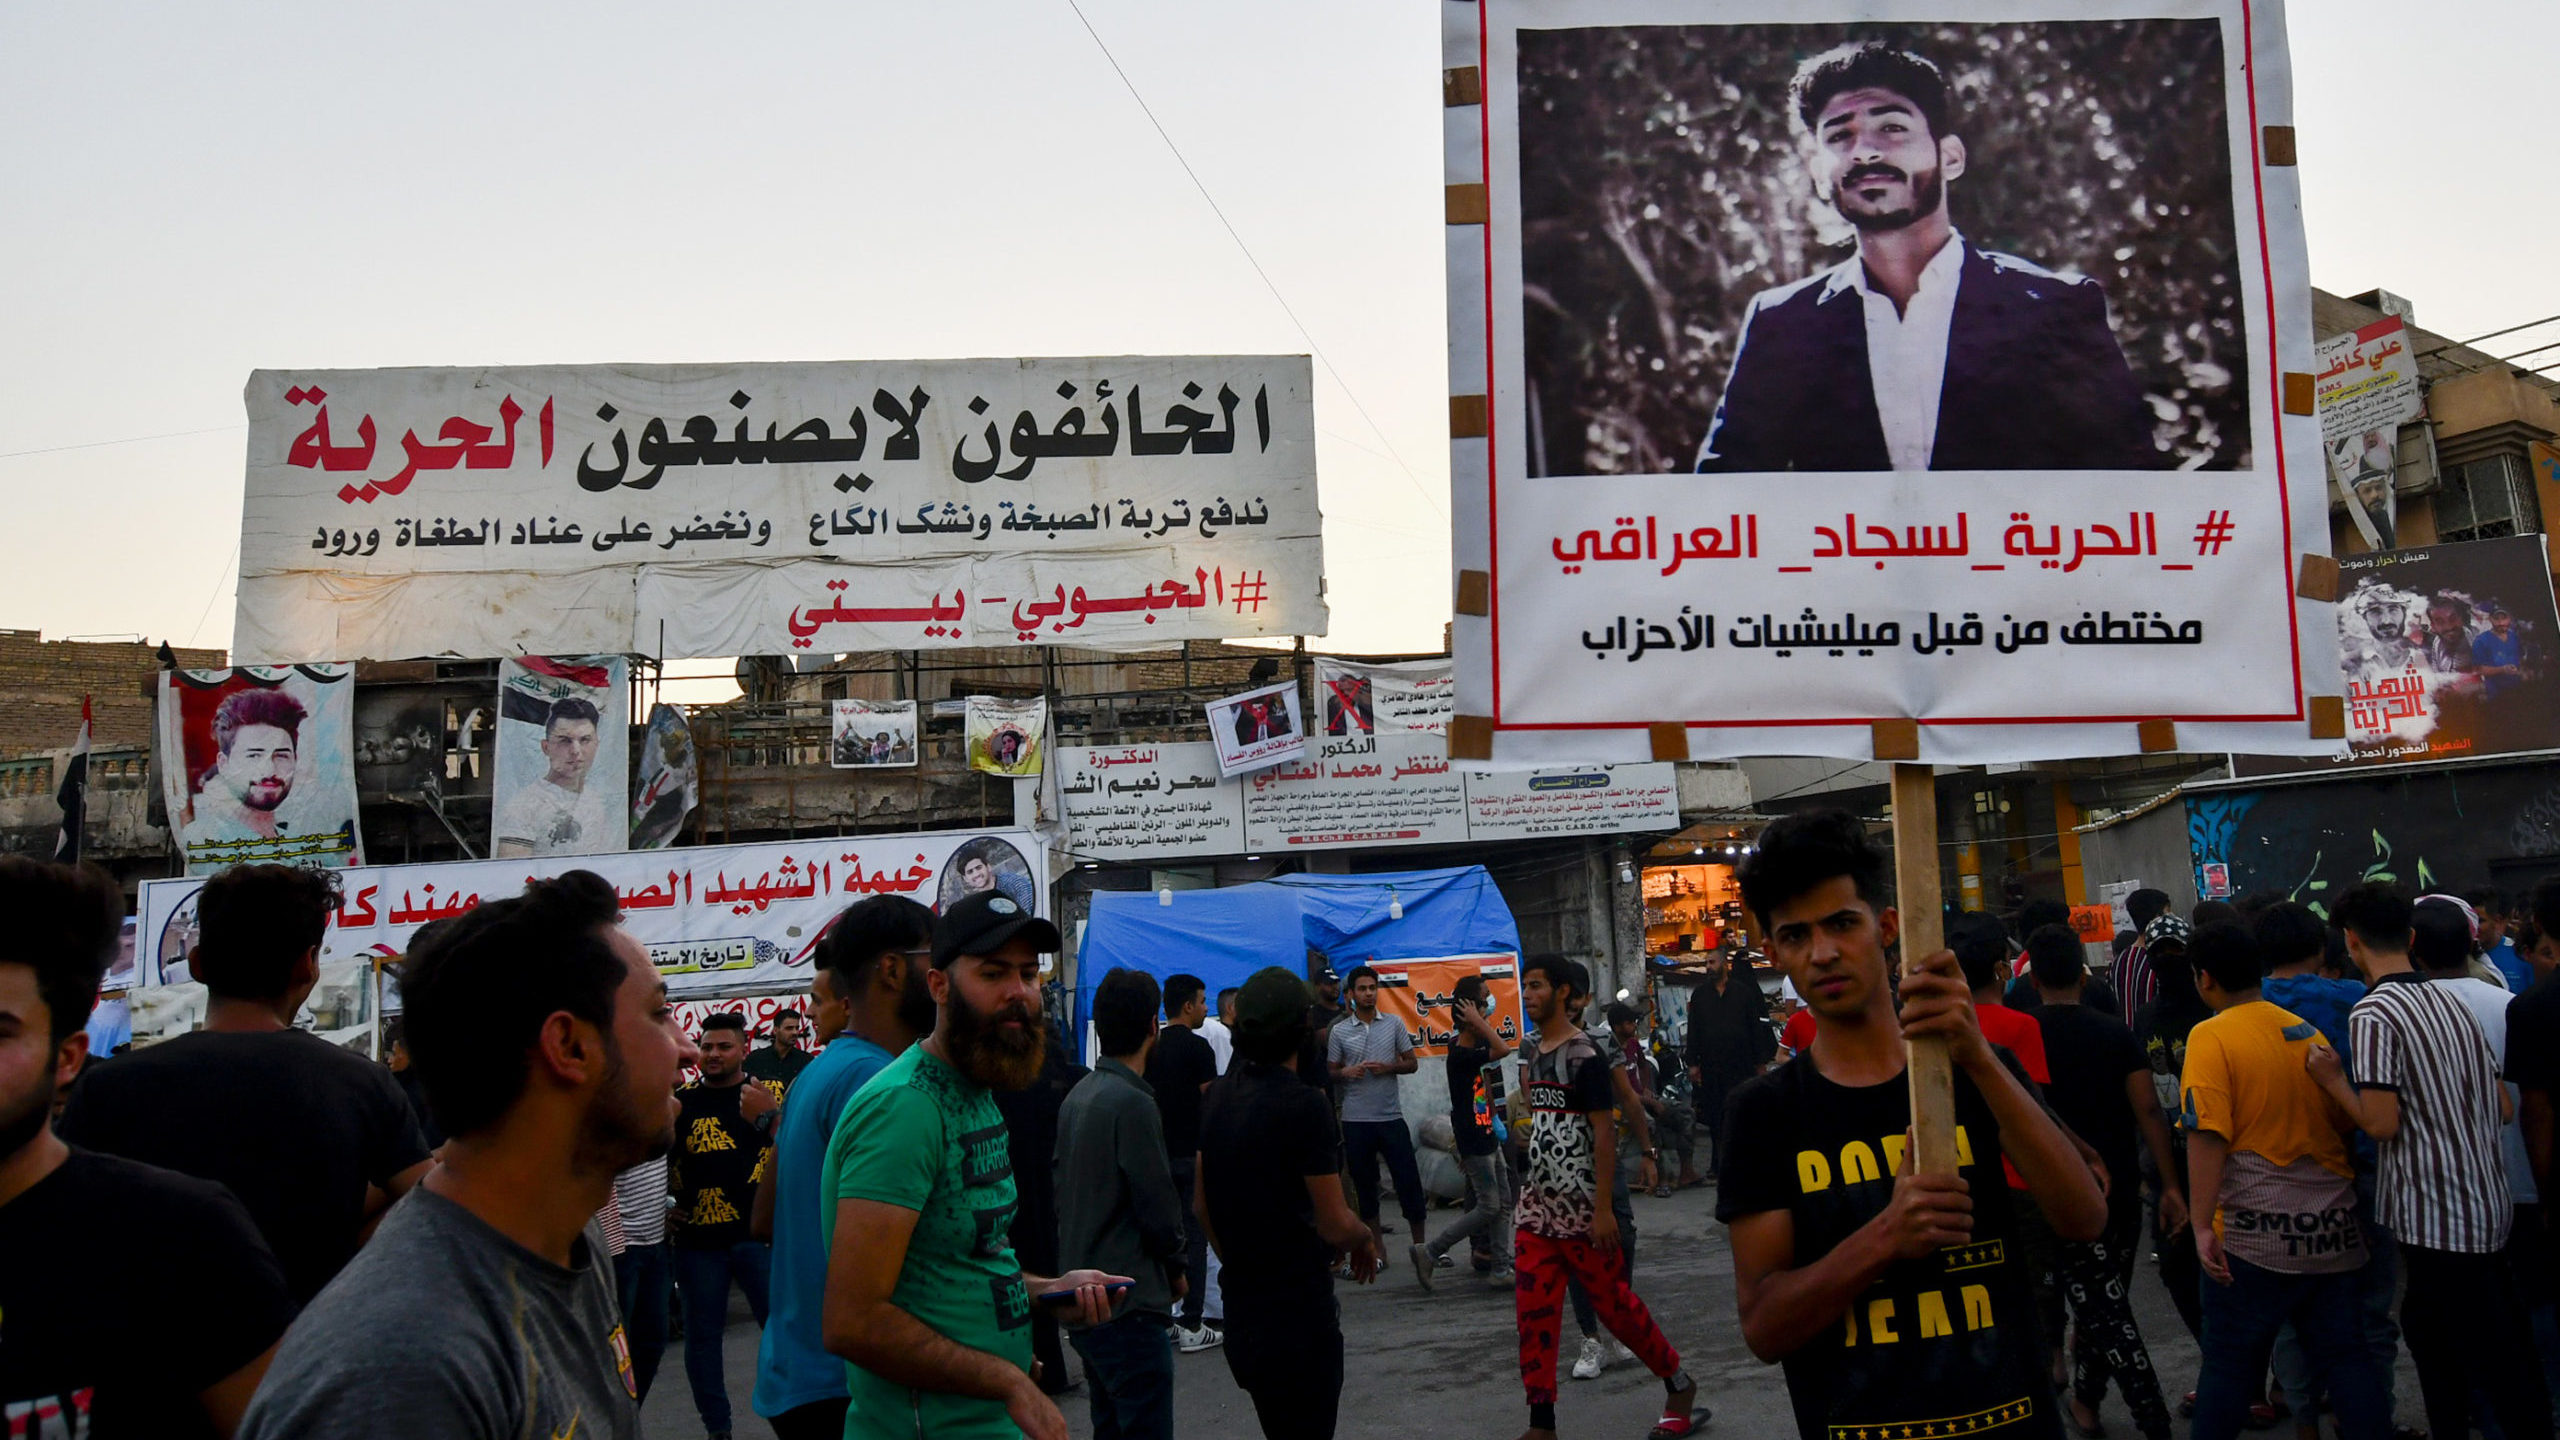 Take Action Against Enforced Disappearance, Human Rights Watch Tells Iraqi Gov’t